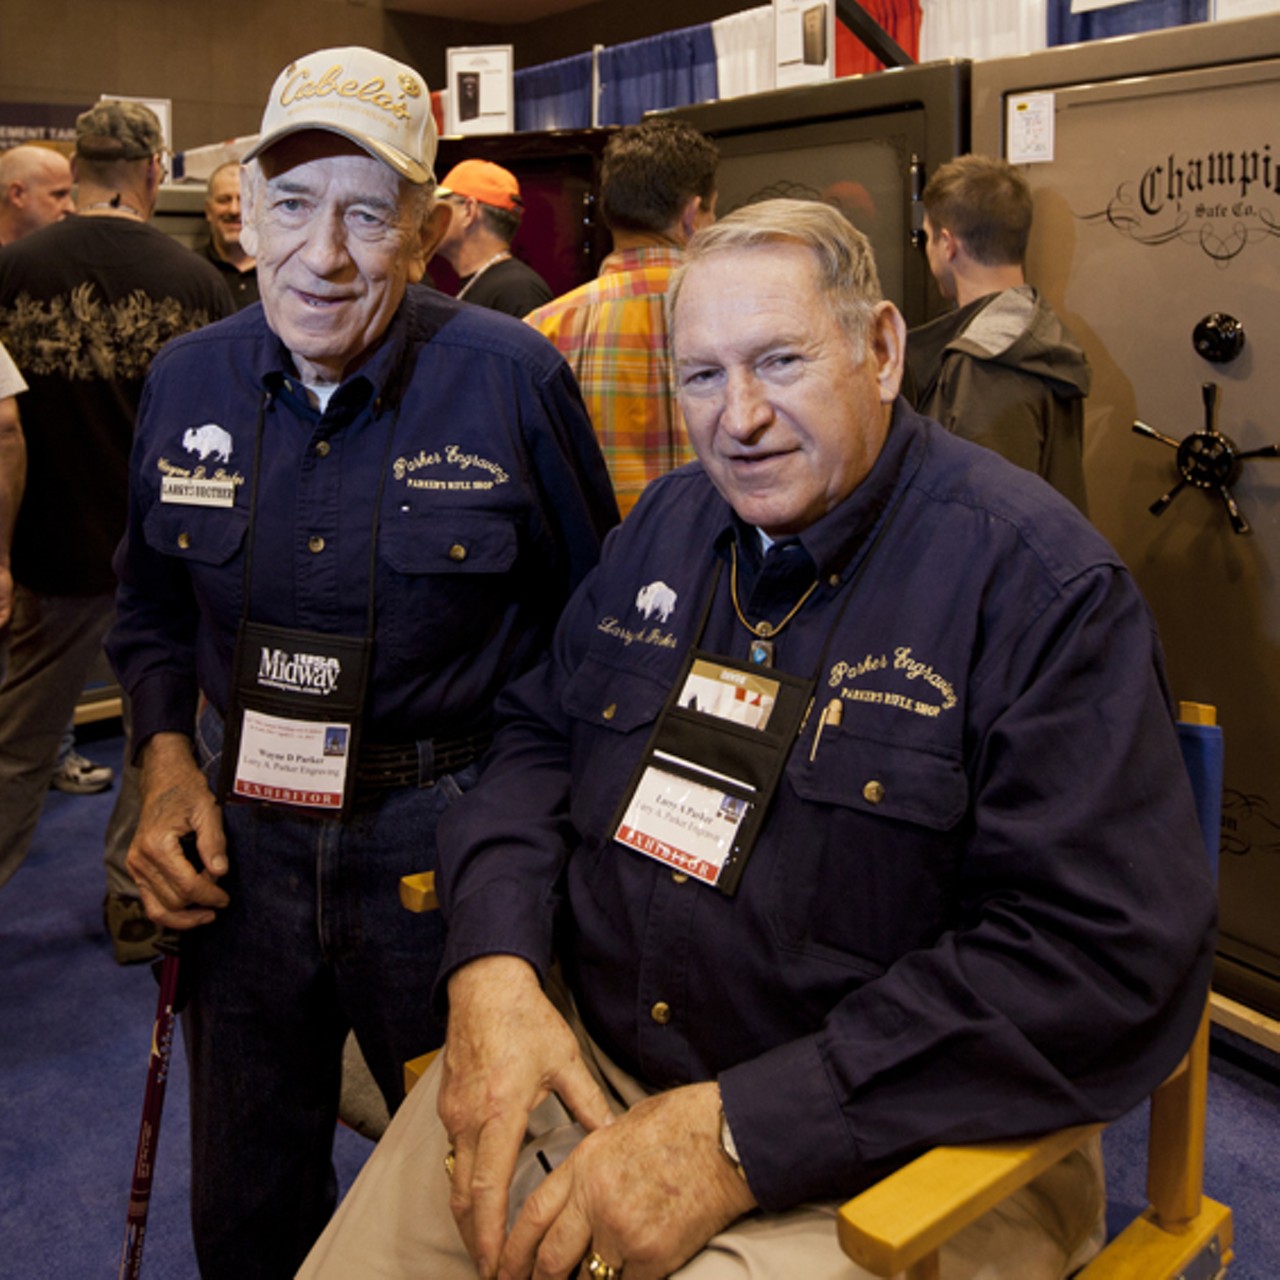 Larry Parker - hand engraver, with his brother, Wayne.